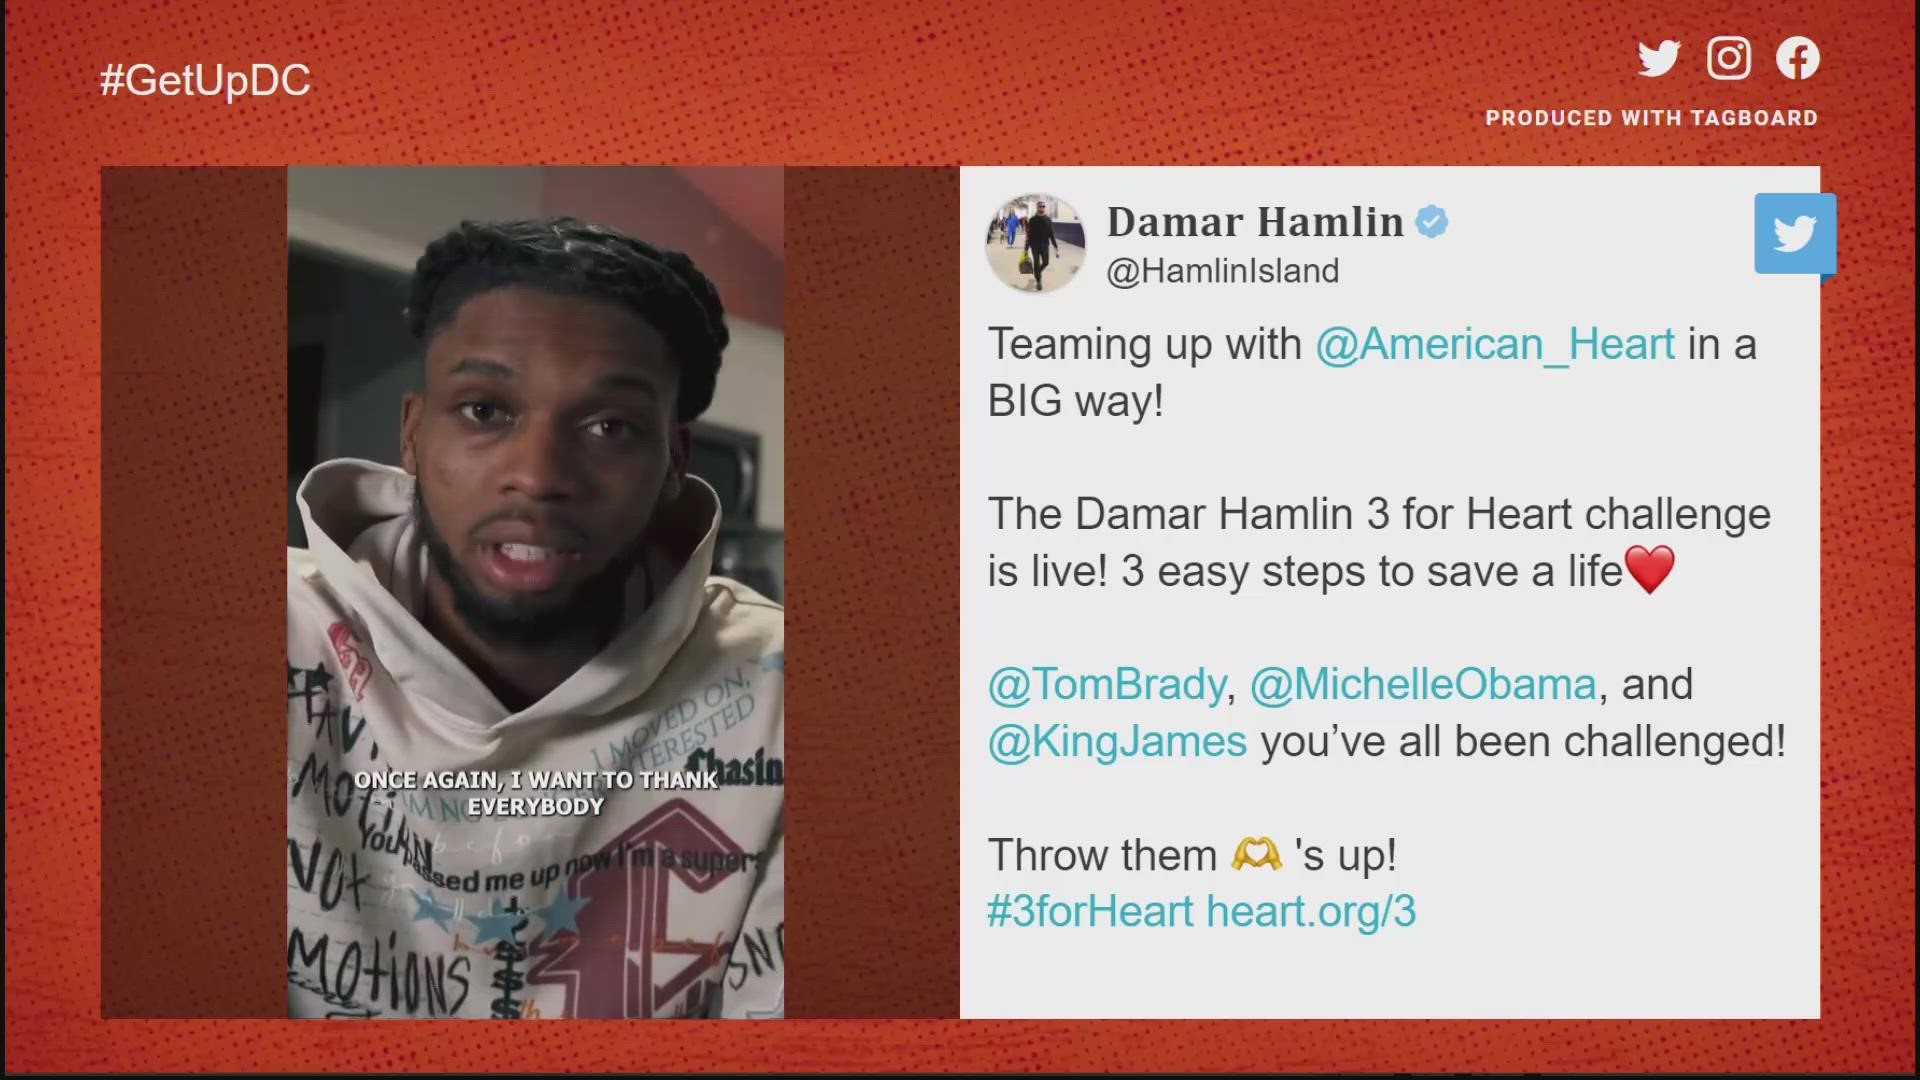 Buffalo Bills' Damar Hamlin, who started off the year having his life saved after collapsing during a game against the Bengals, is now launching a CPR challenge.